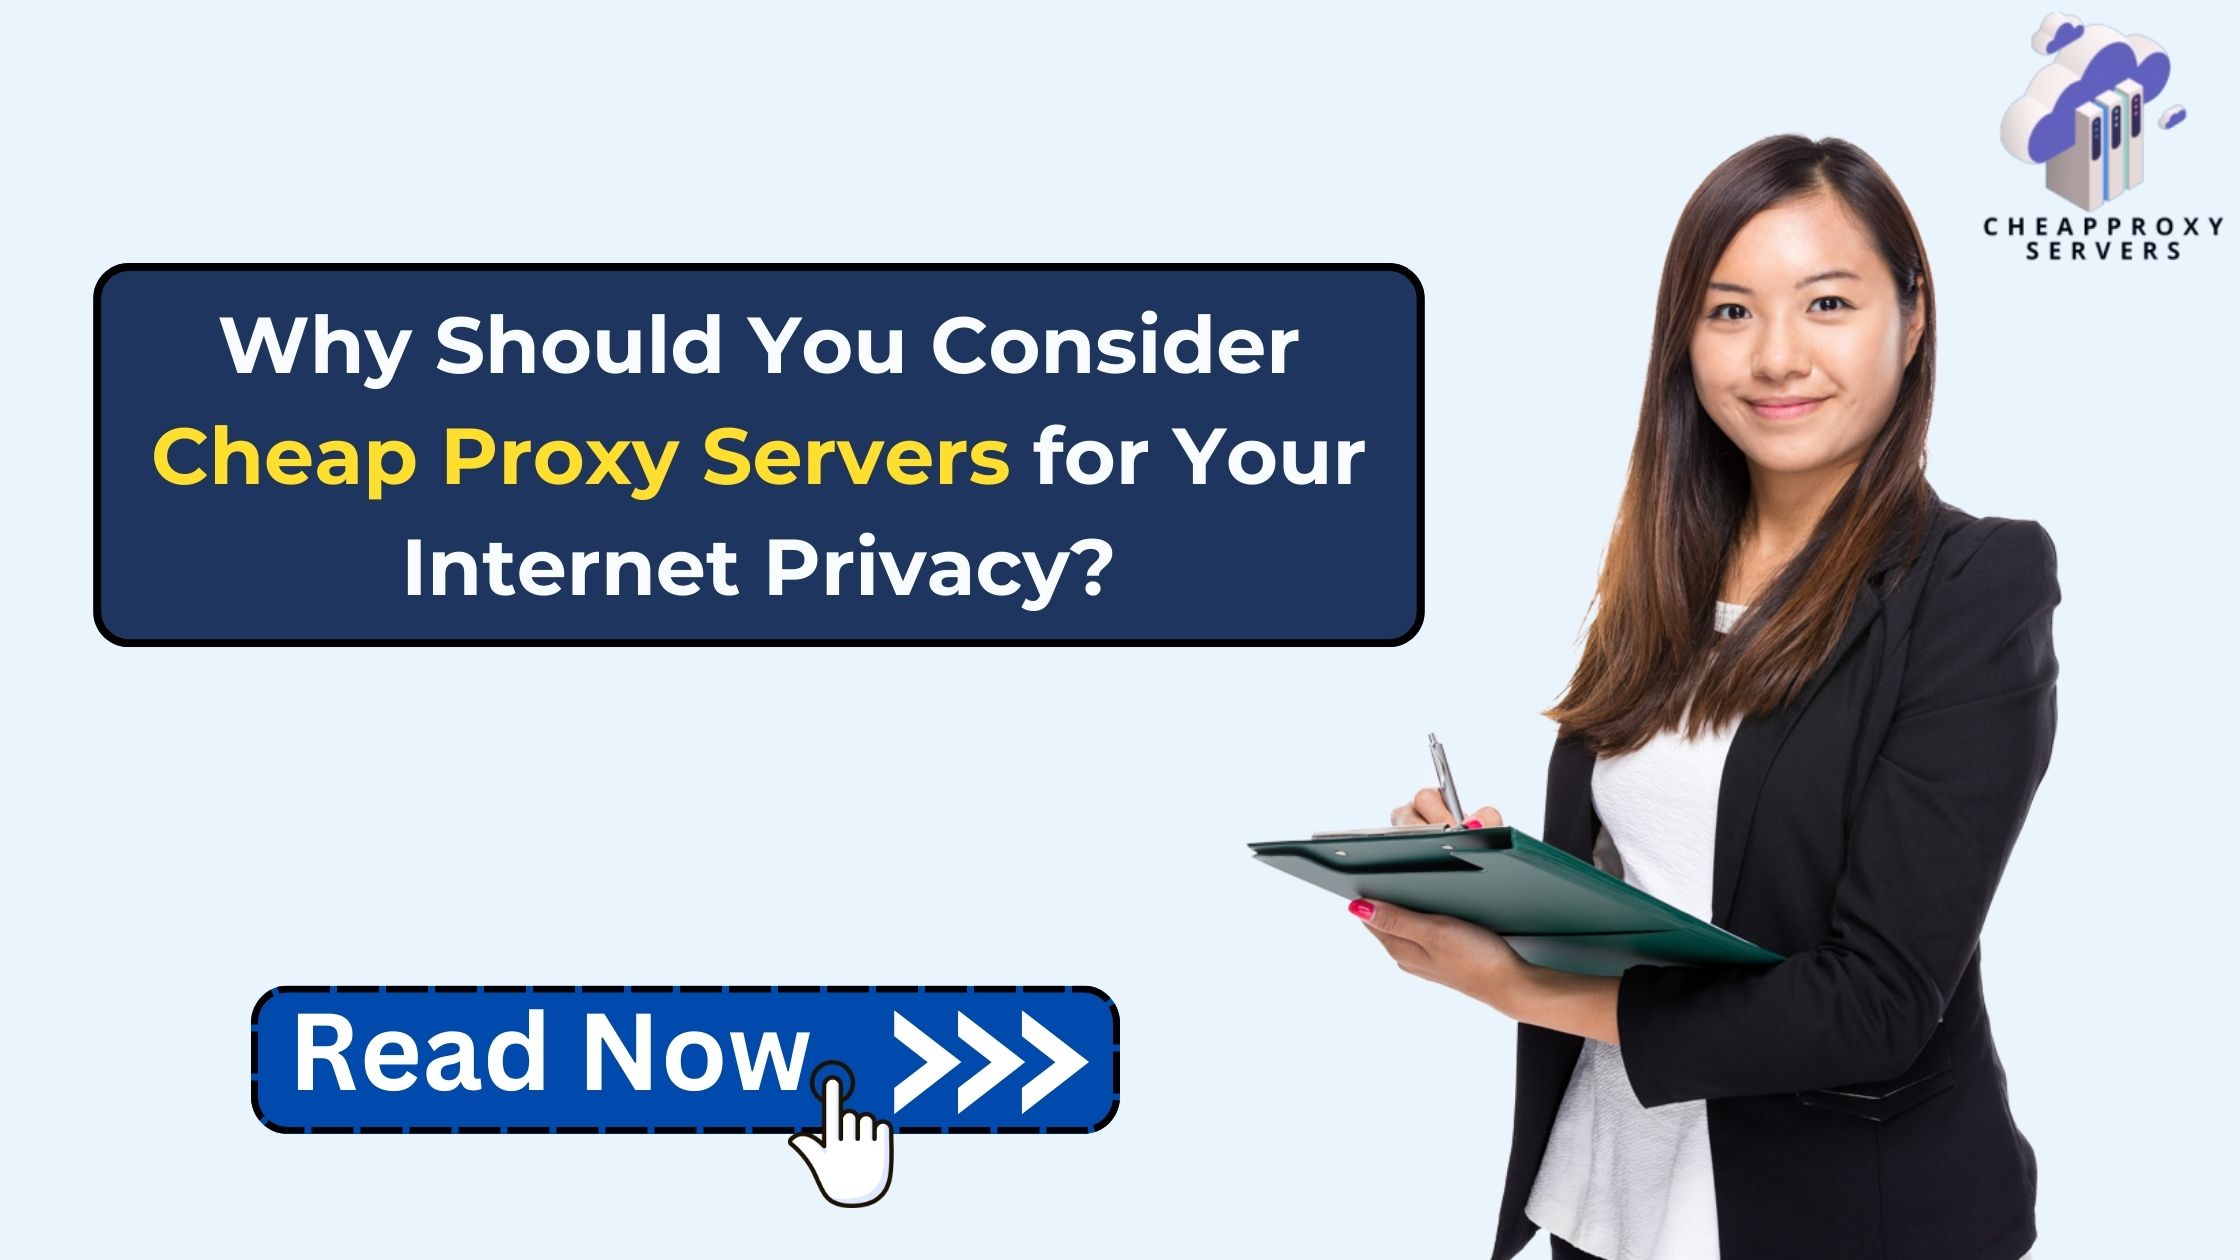 Why Should You Consider Cheap Proxy Servers for Your Internet Privacy